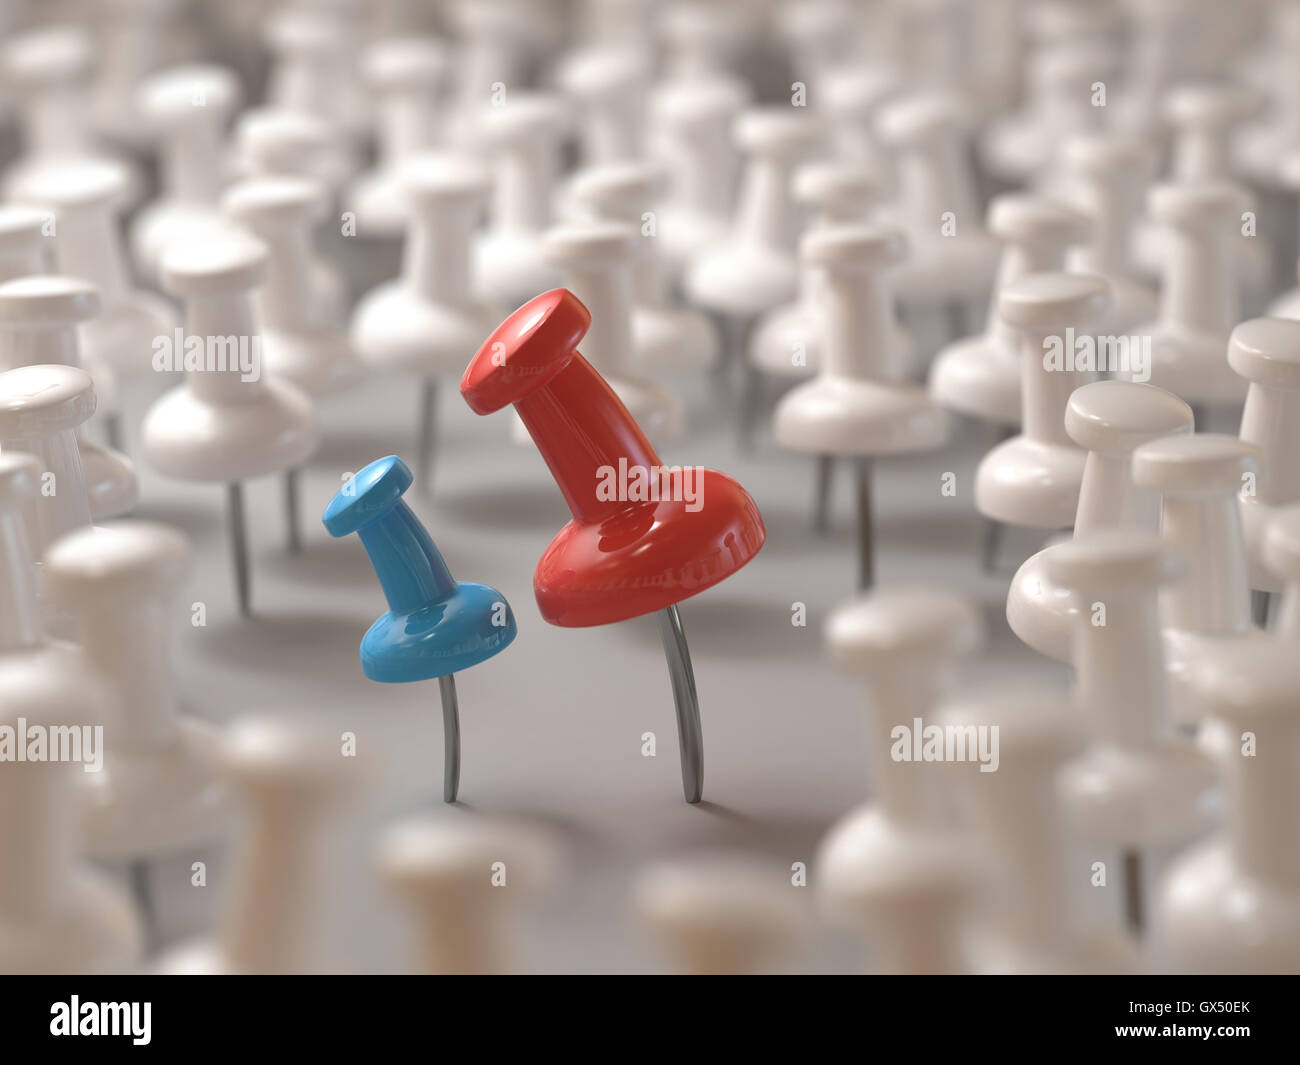 3D illustration. Red pin intimidating the blue pin. Bullying concept or harassment on the workplace. Stock Photo